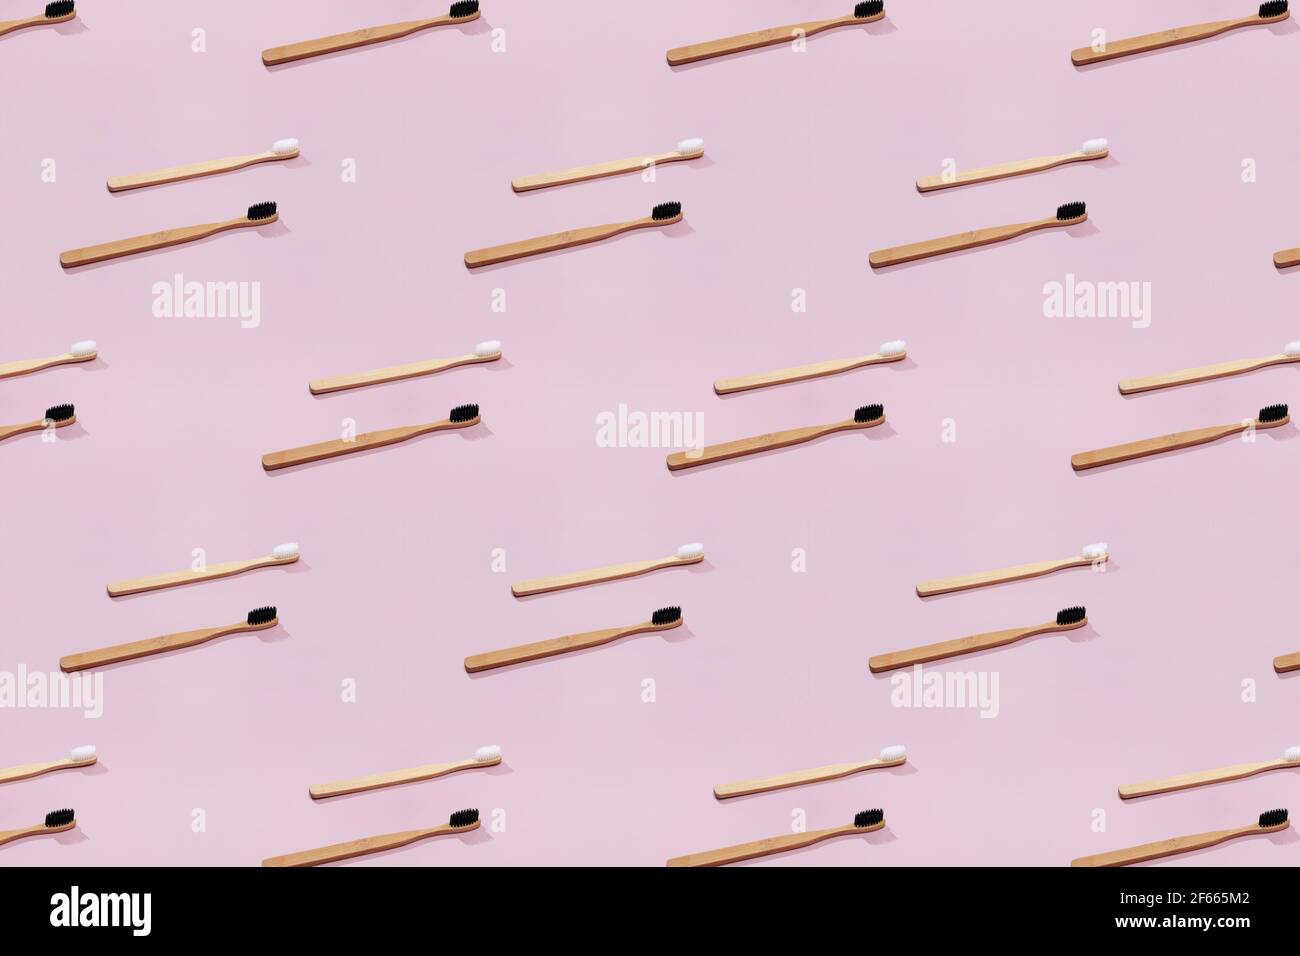 Pattern with wooden tooth brushes on pink background. Stock Photo